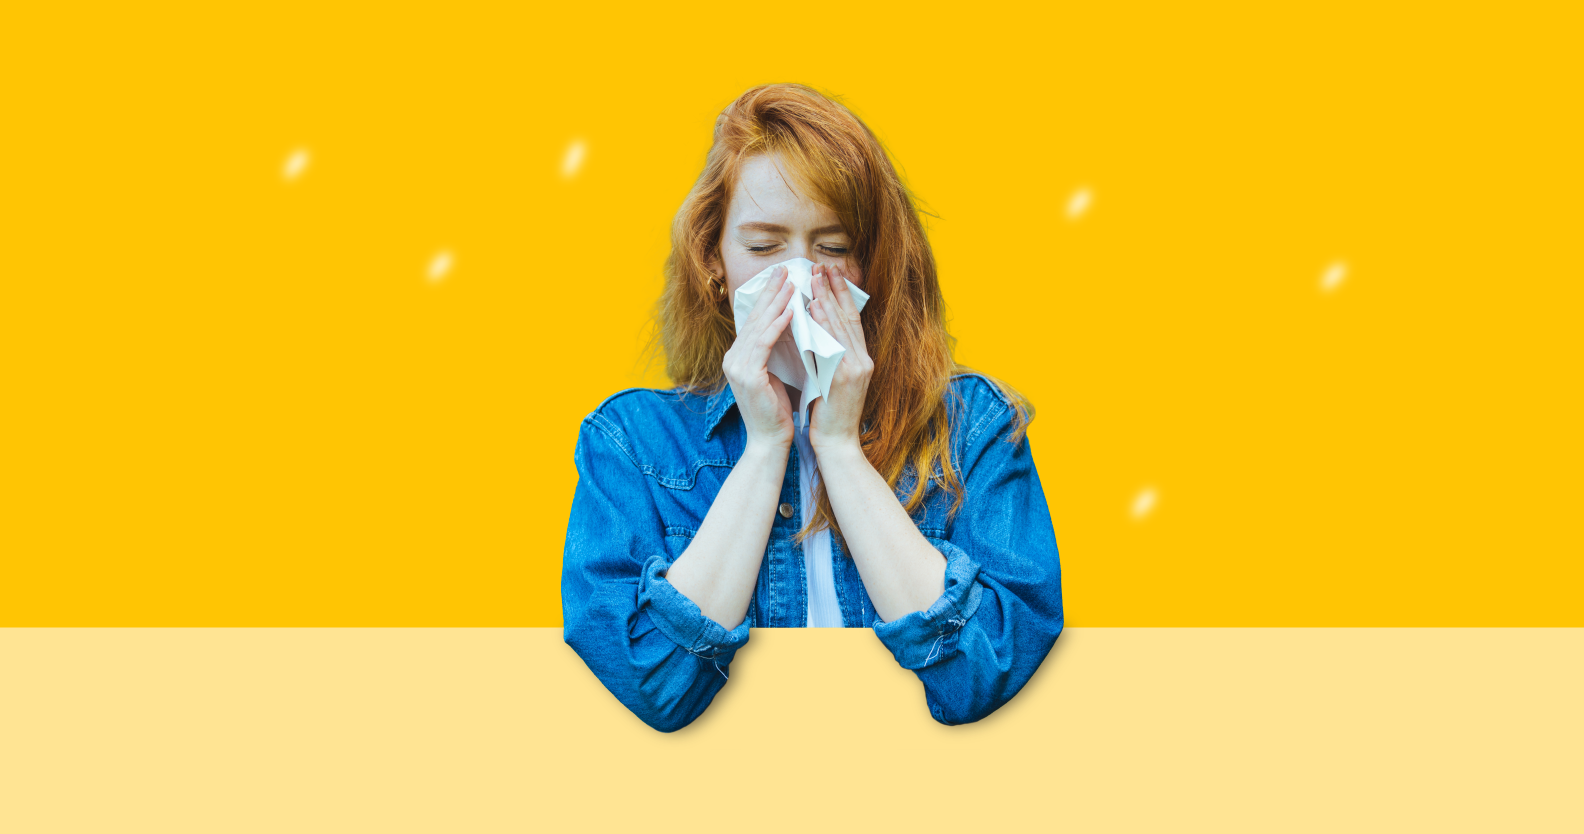 Does cold weather make you sick?